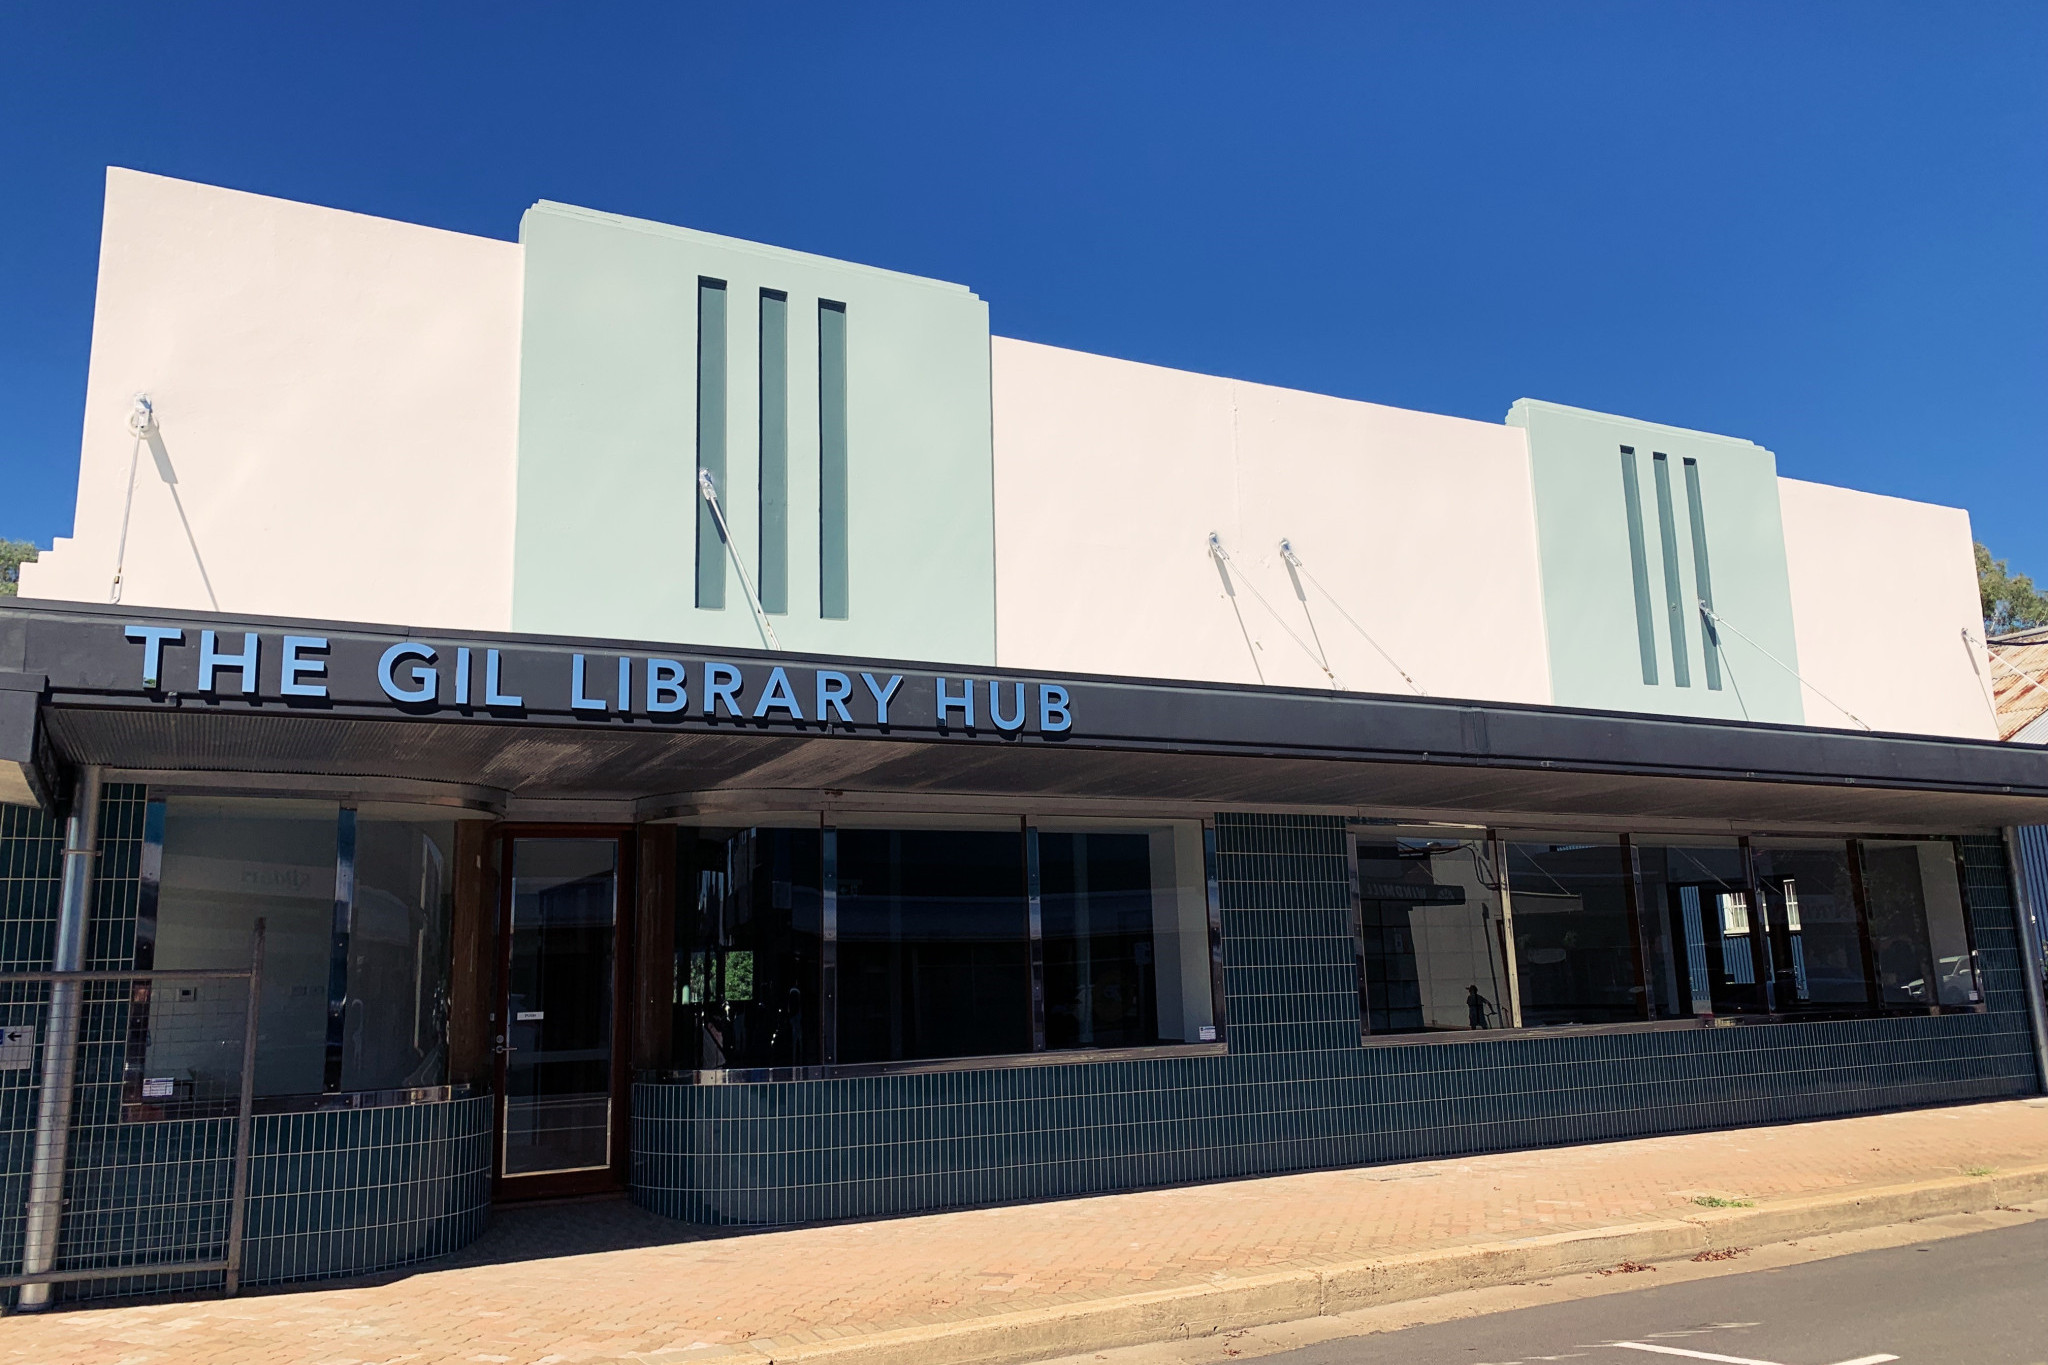 Although council currently doesn’t have a “definite timeframe for completion” of the GIL Library Hub, the project is progressing towards the final fit-out and regulatory stages. Photo supplied.